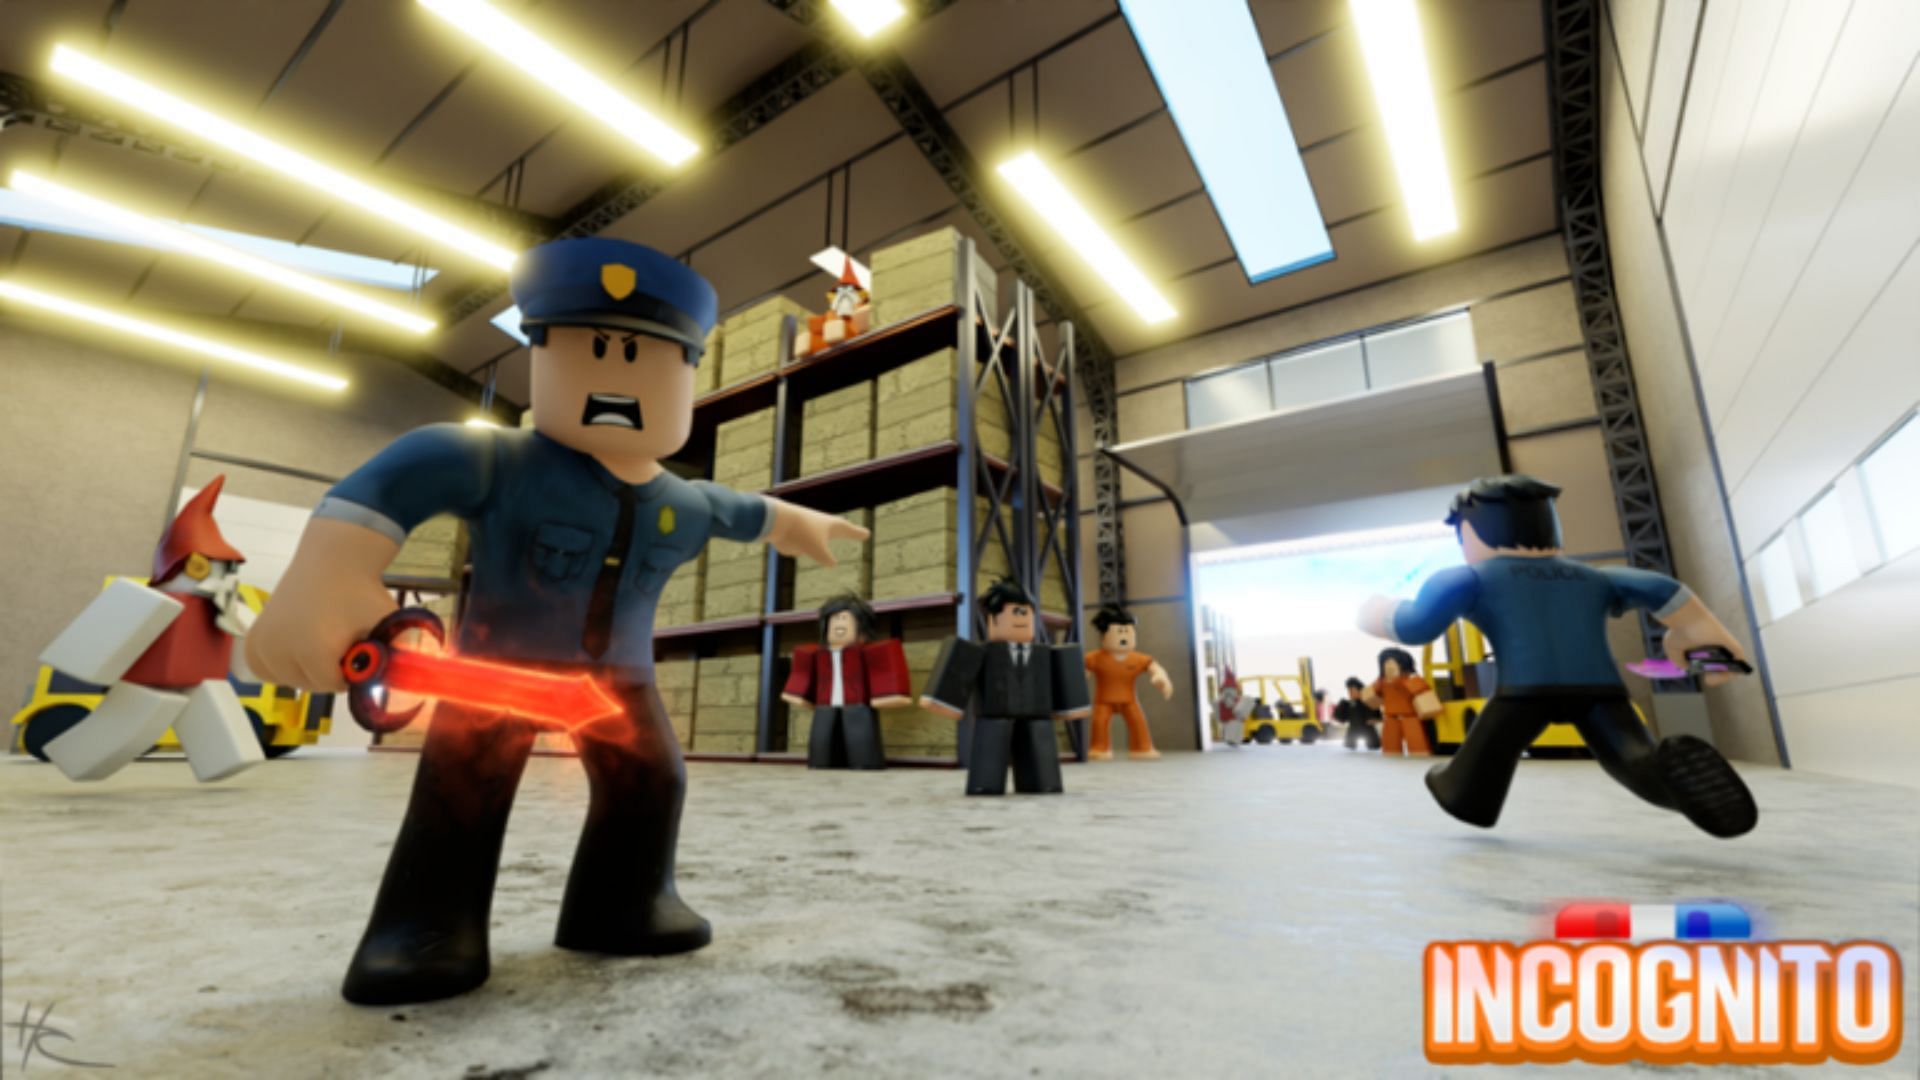 Incognito is available in Roblox (Image via Roblox)